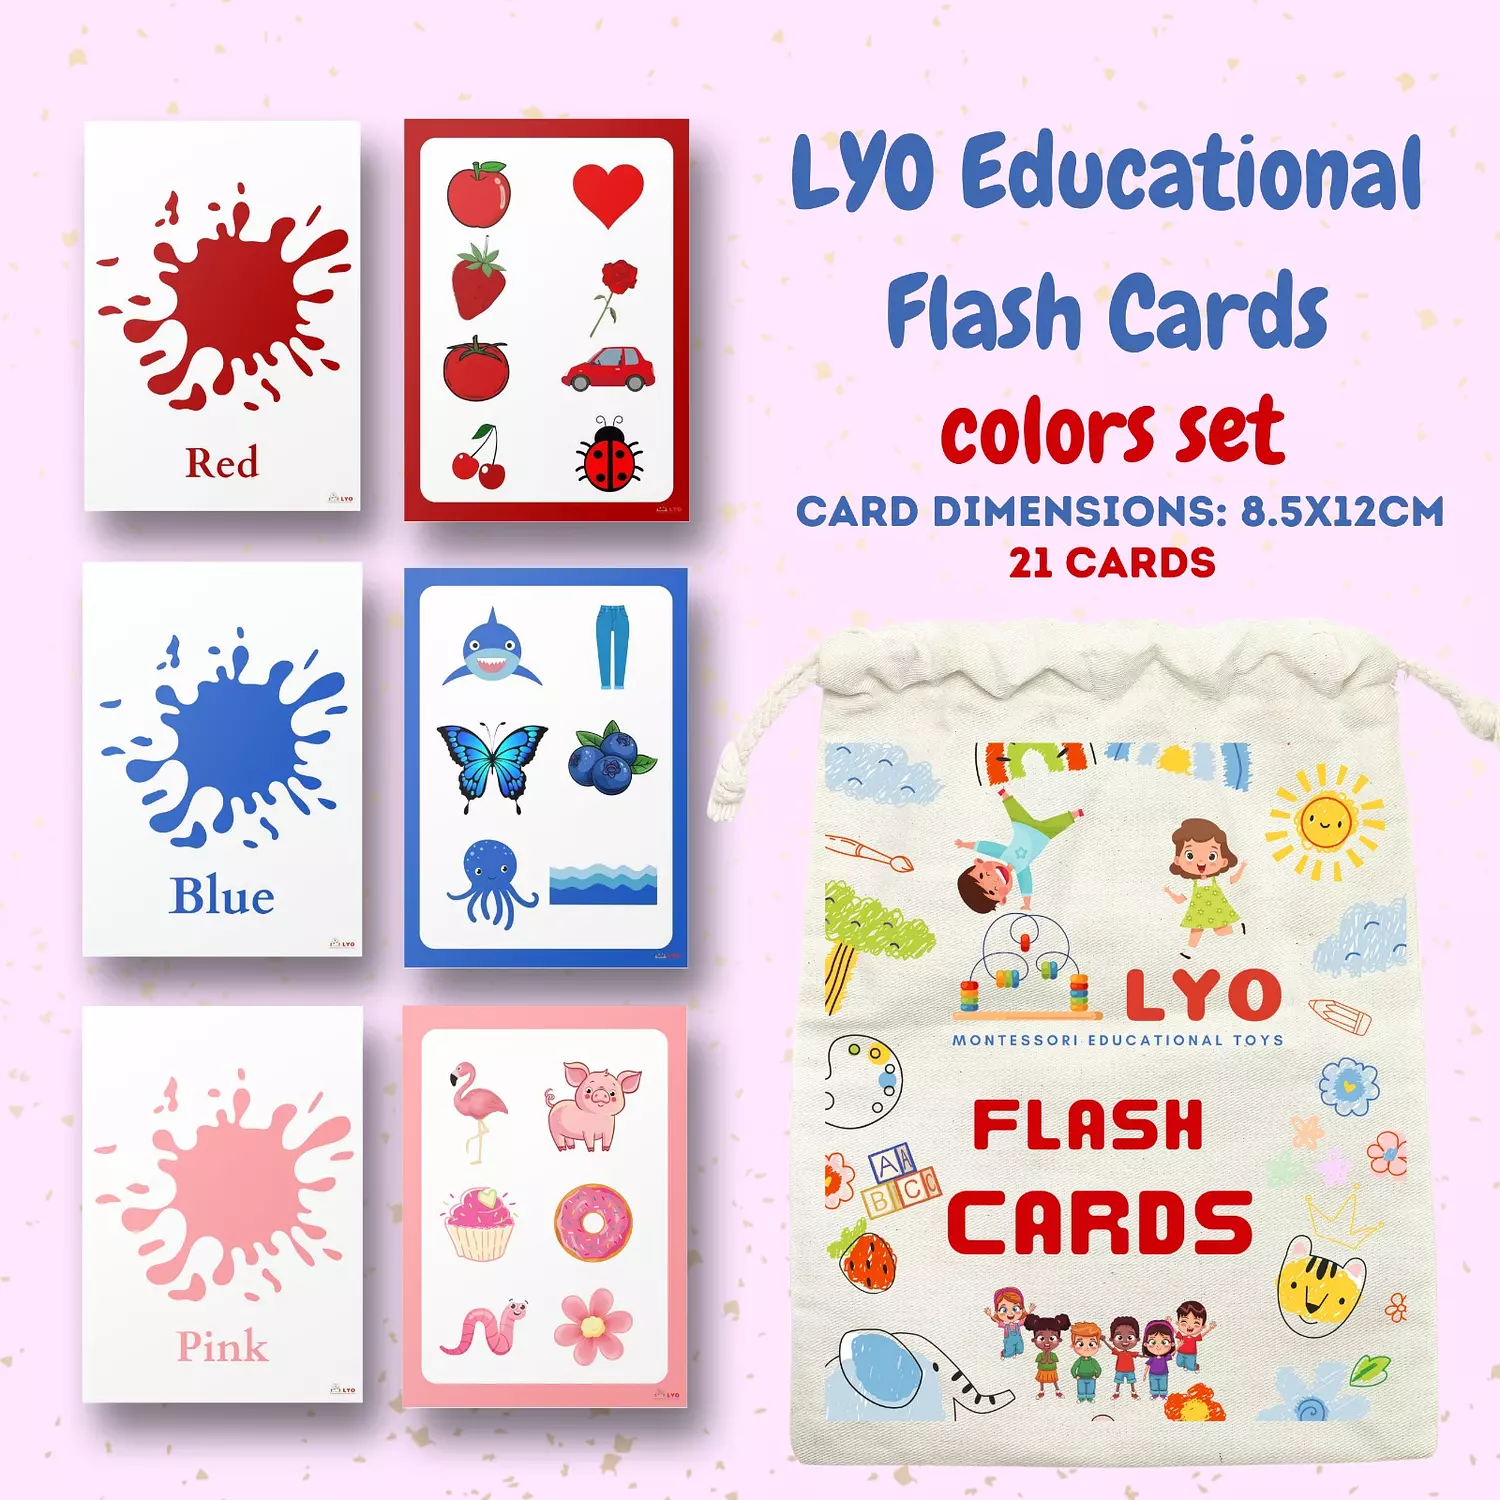 LYO Flash Cards (Colors-Shapes) hover image